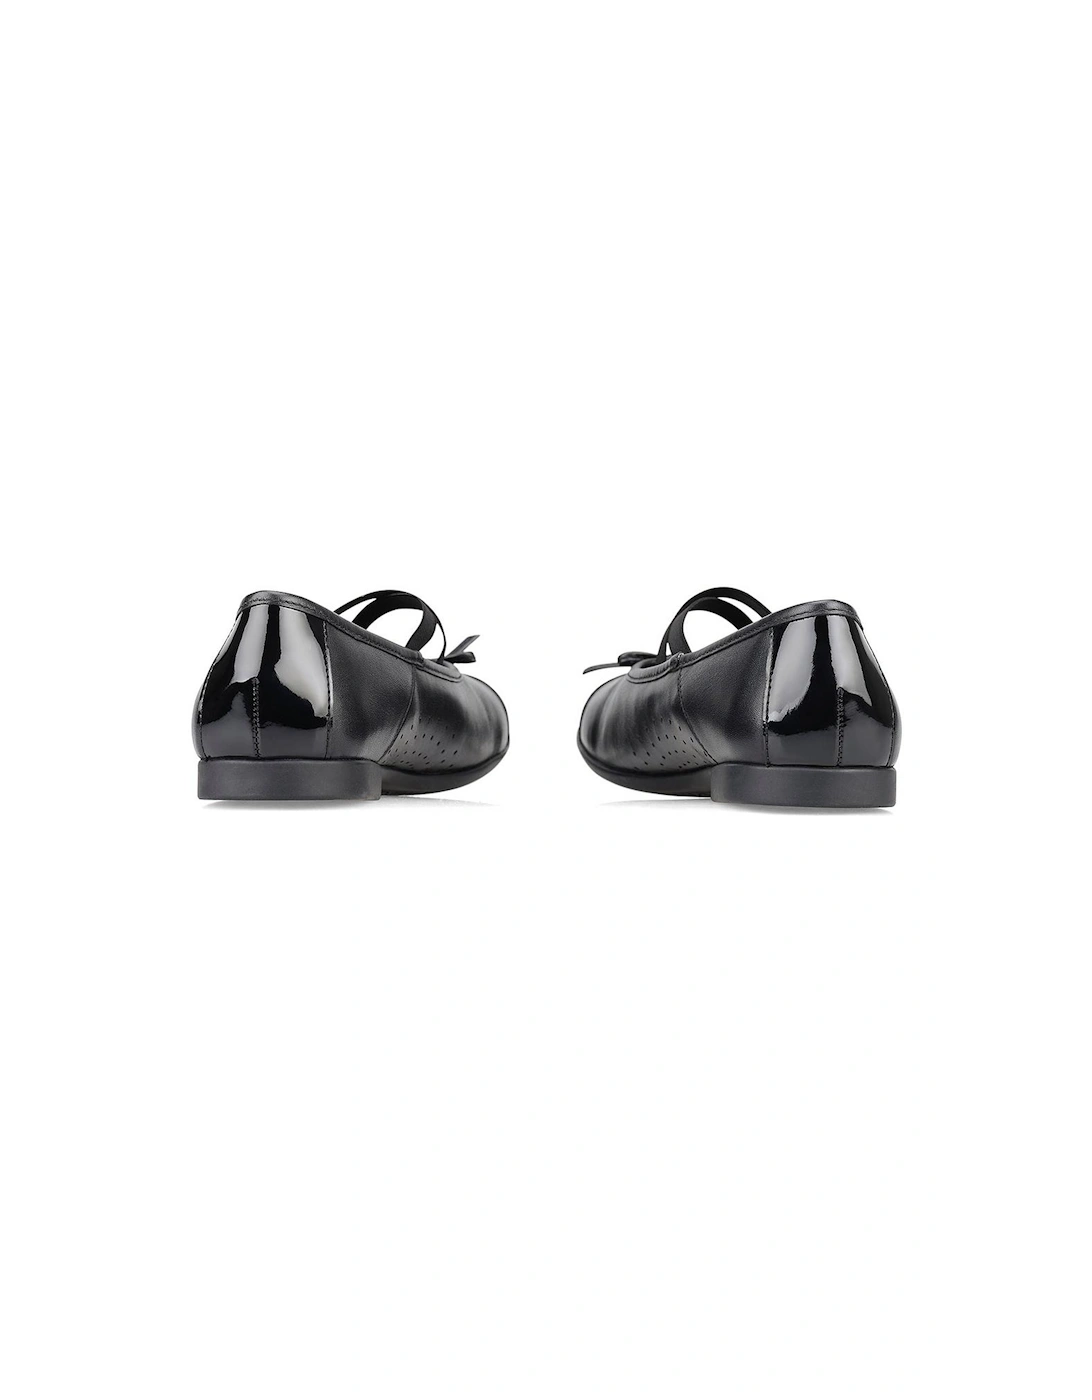 Girls Idol Patent Leather Slip On School Shoes with Bow - Black